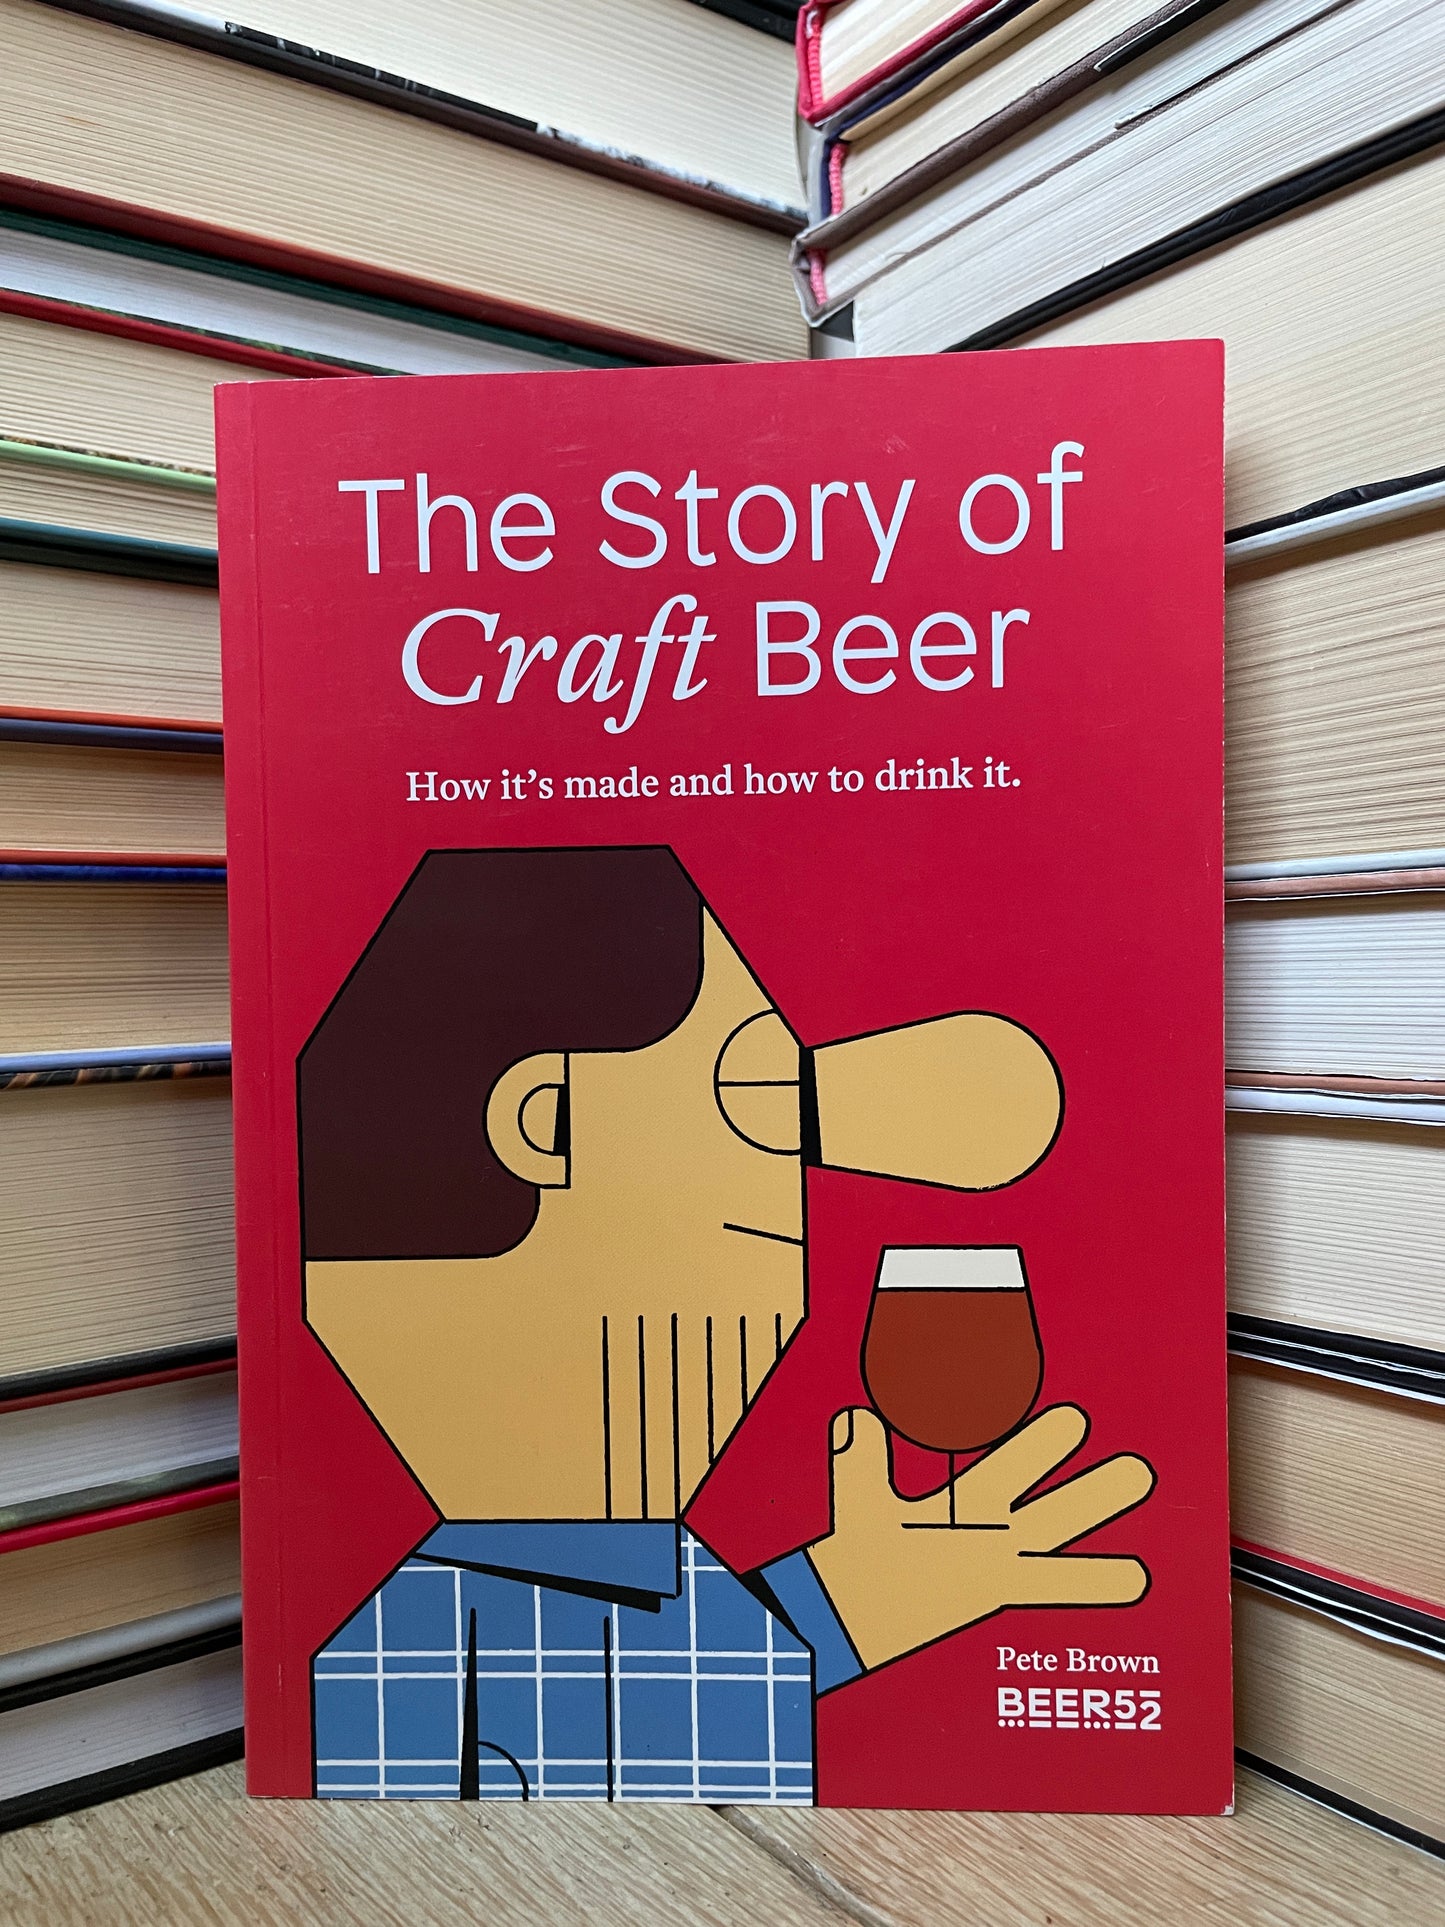 Pete Brown - The Story of Craft Beer